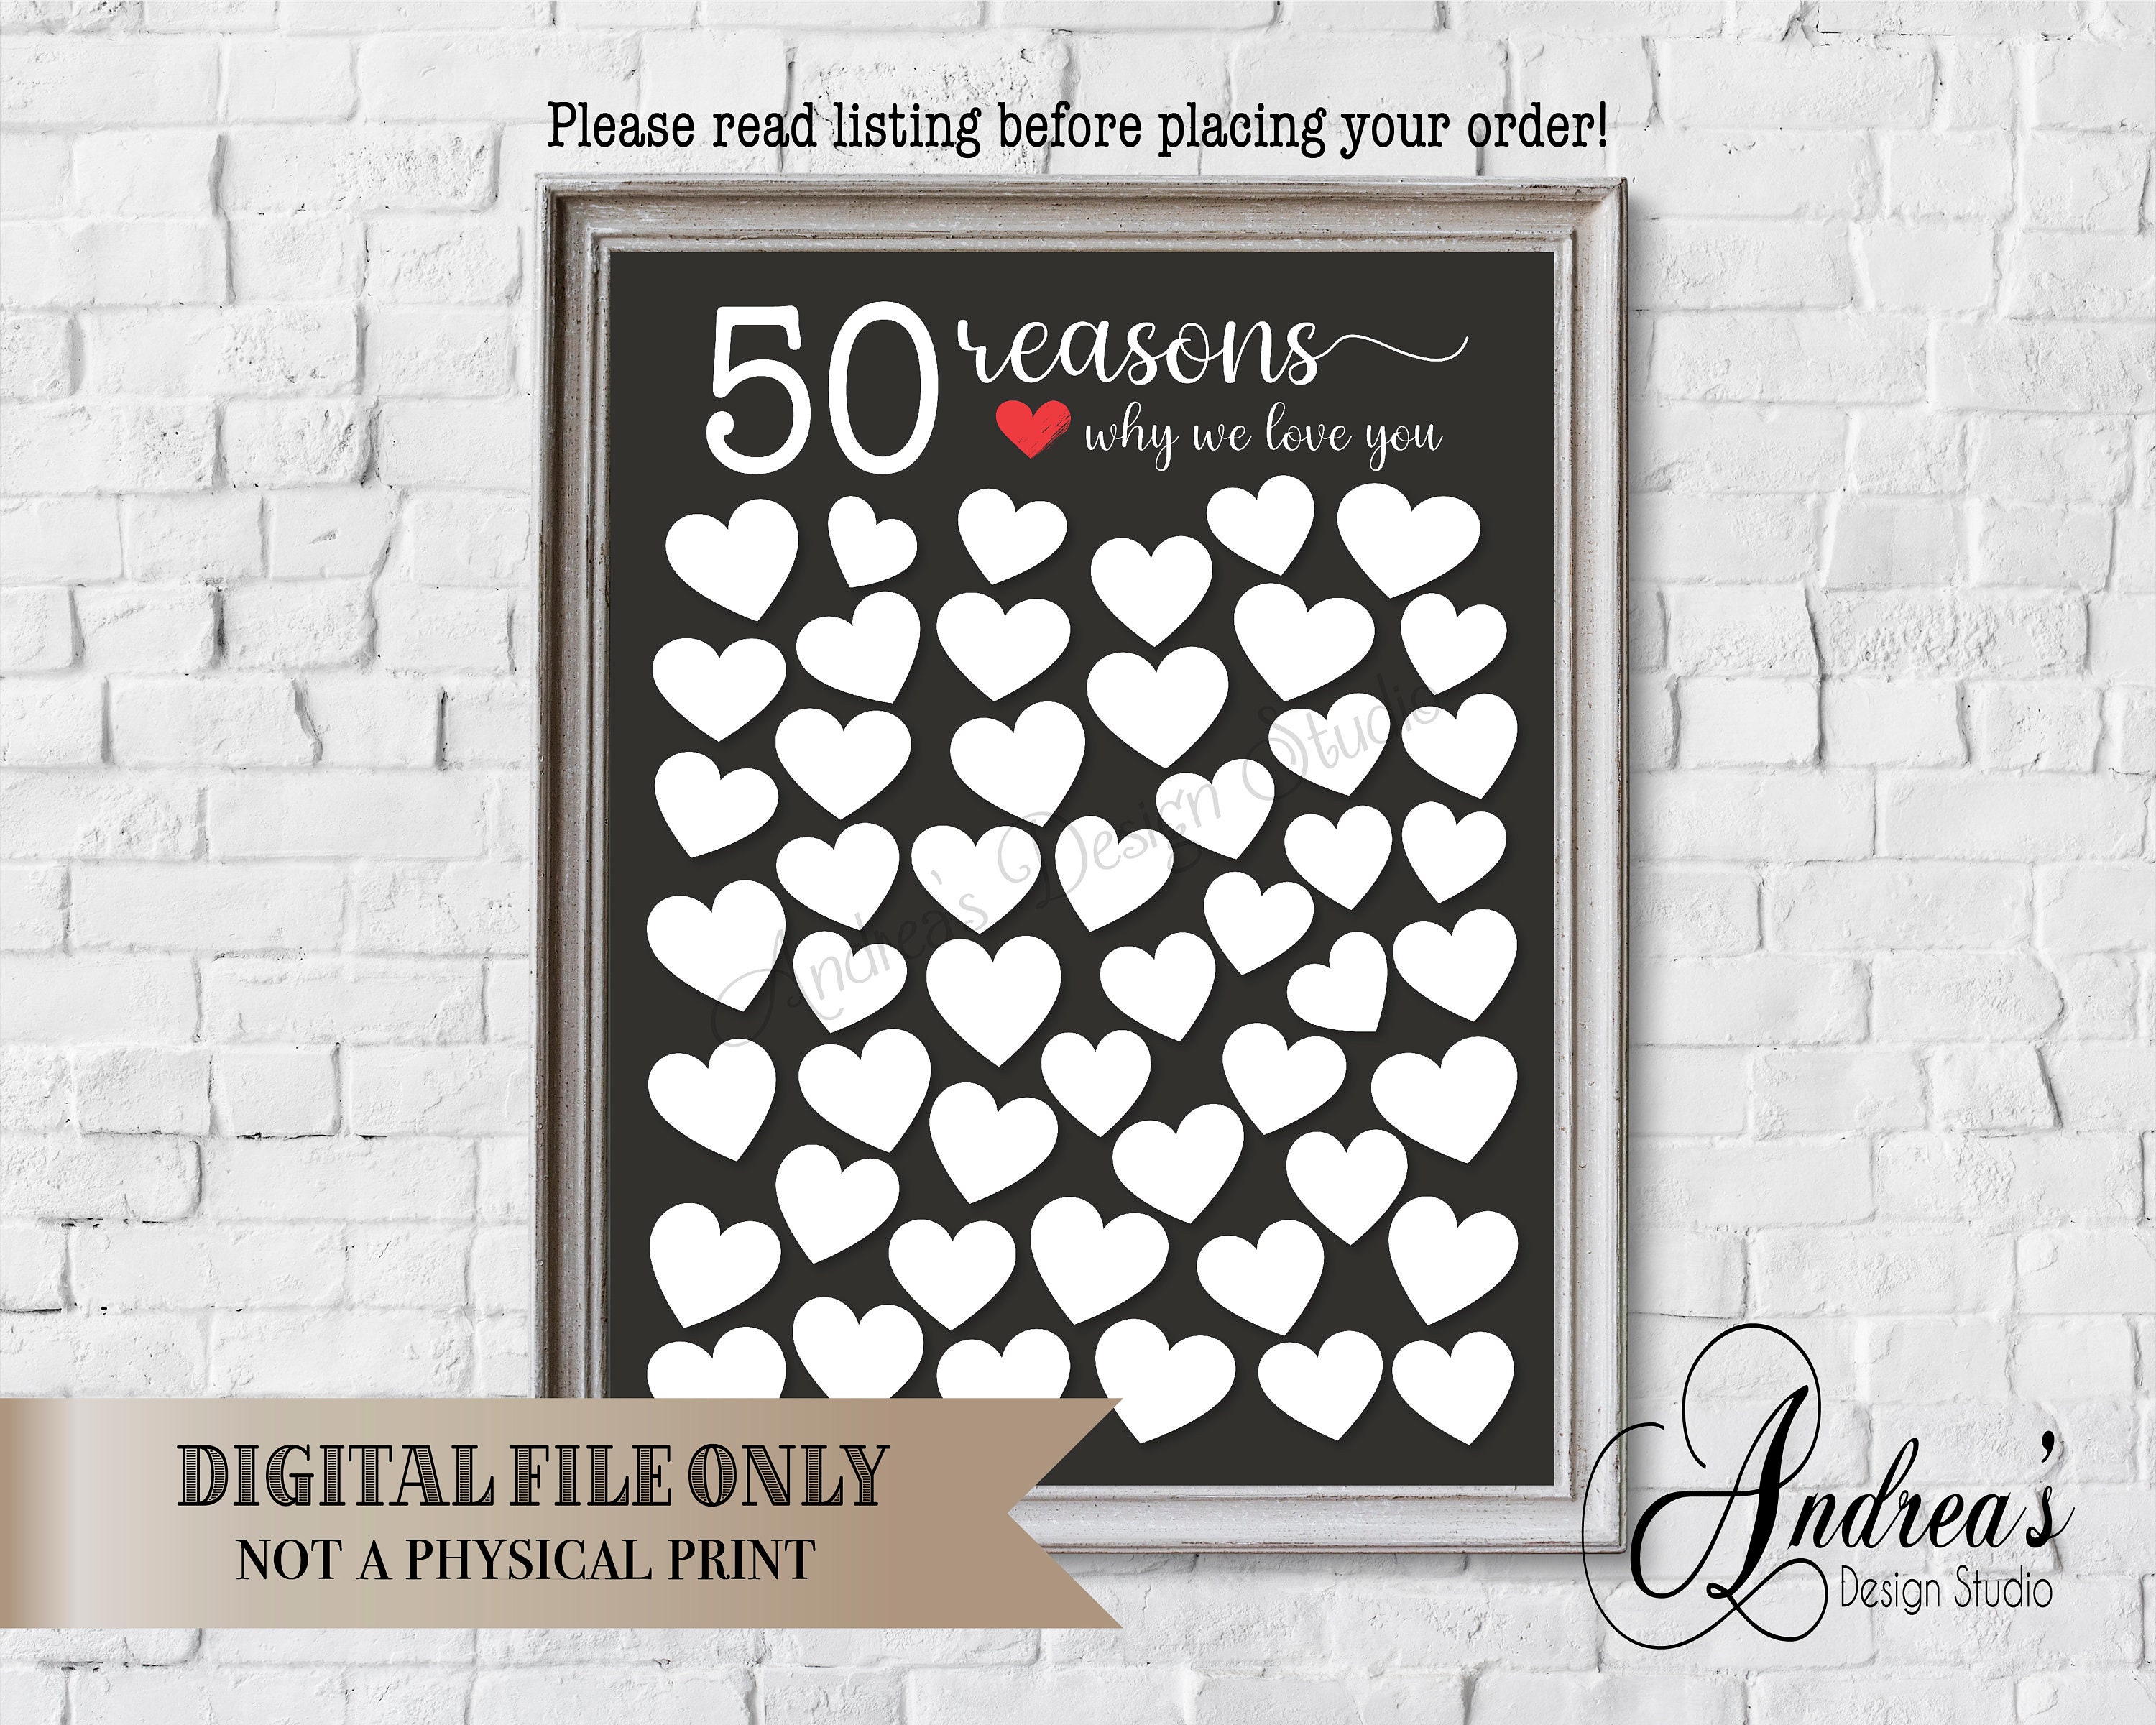 50 Reasons Why We Love You Signature Board Message Board